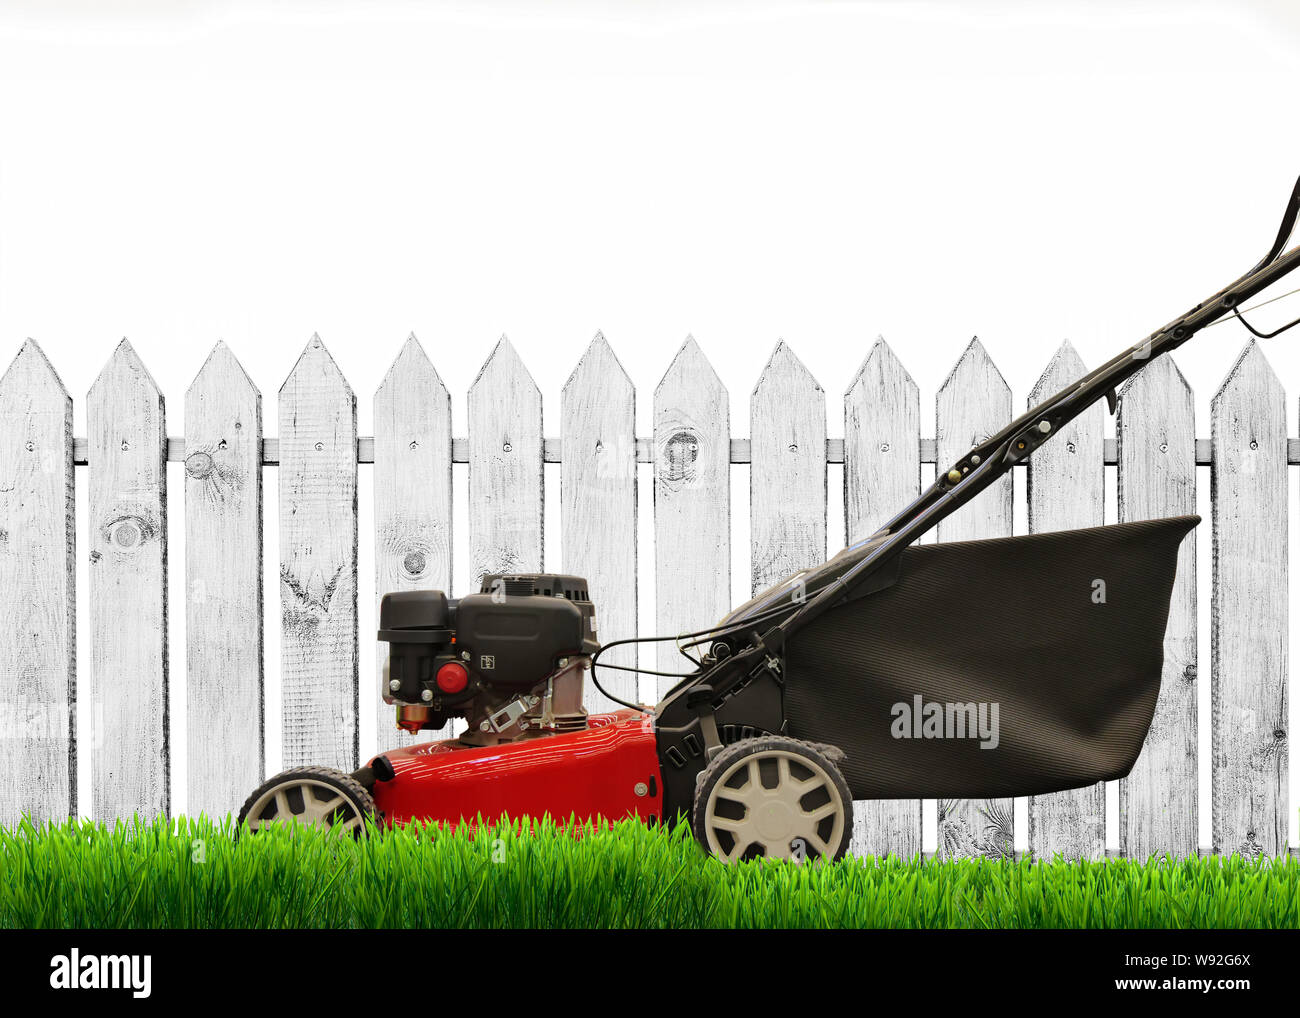 Lawn mower mows lawn. Is isolated. on a white background Stock Photo